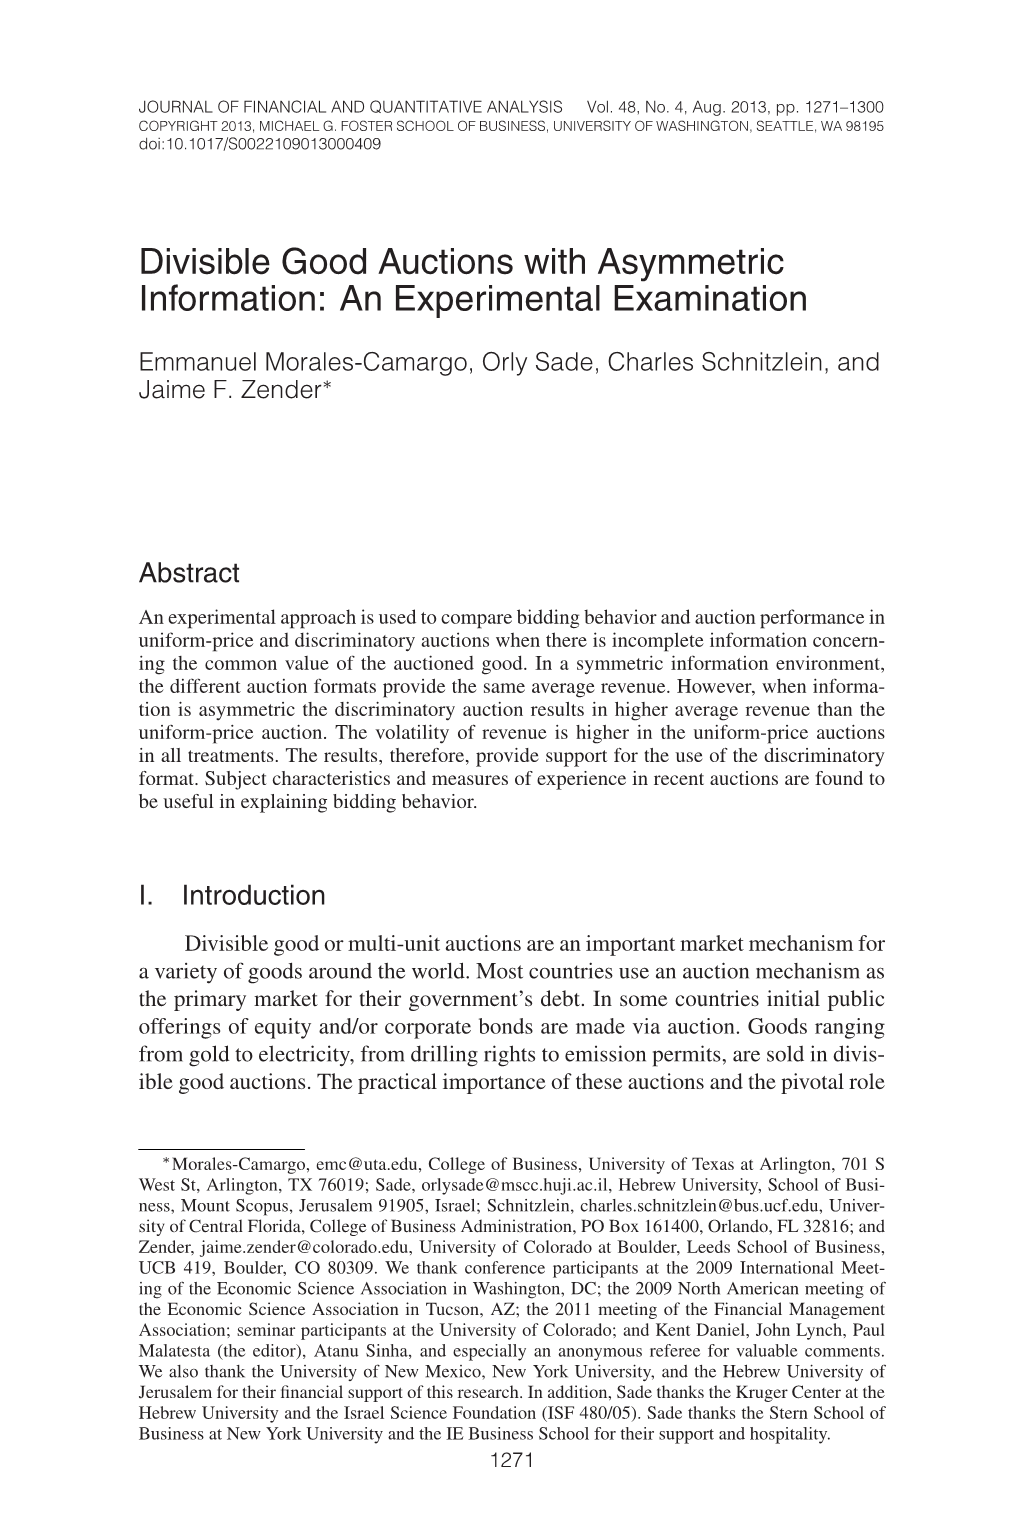 Divisible Good Auctions with Asymmetric Information: an Experimental Examination